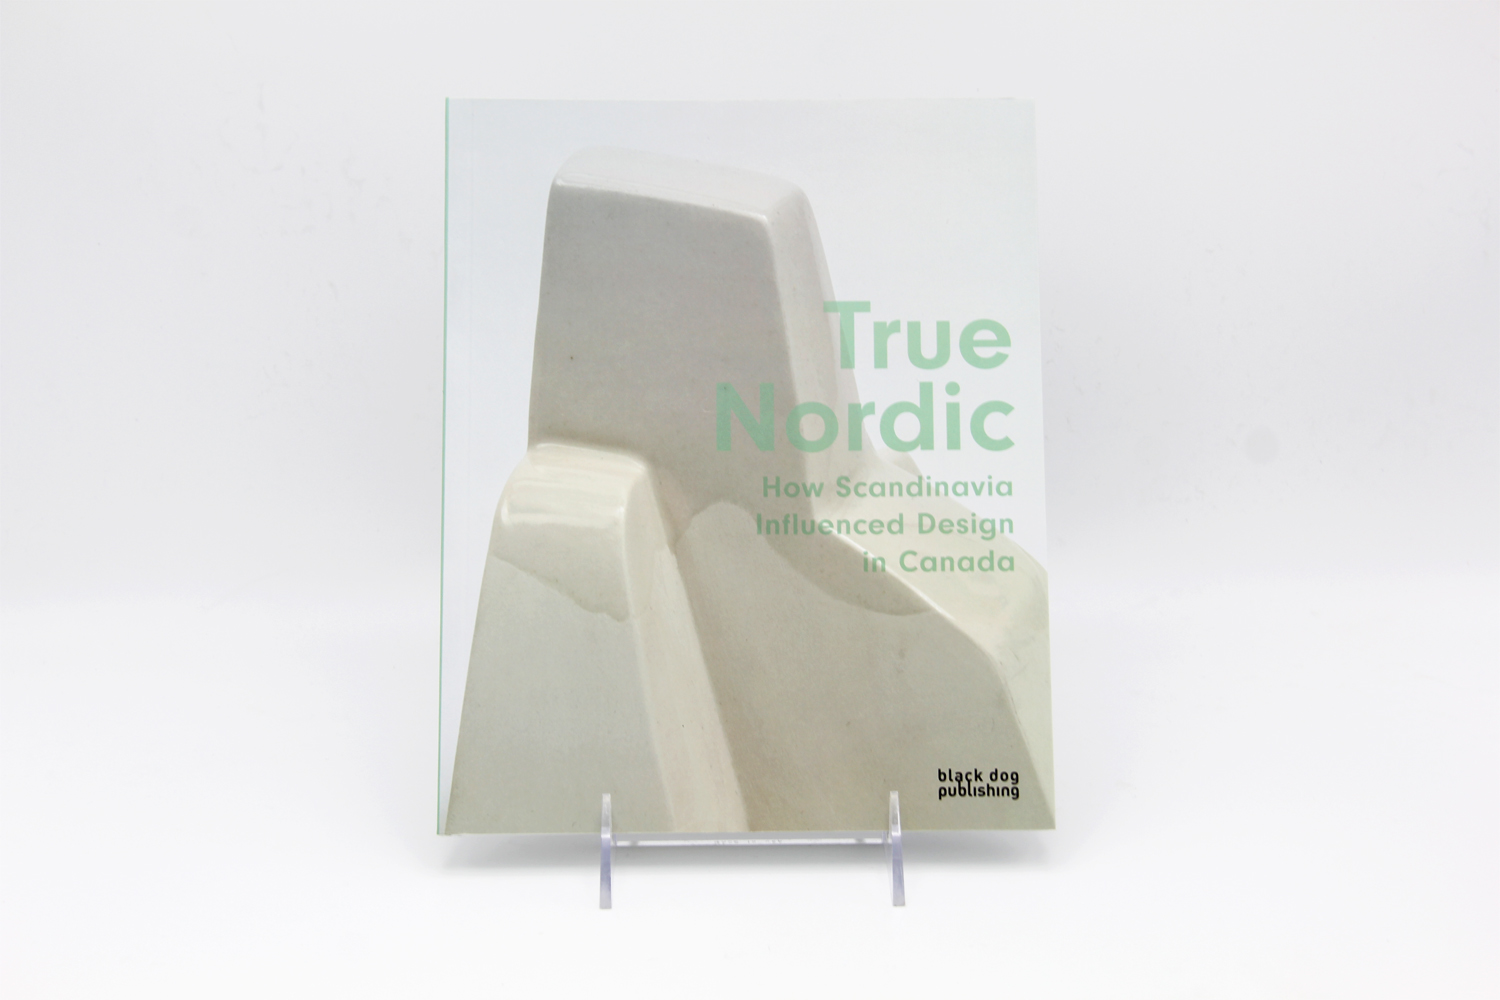 Exhibition Catalogue: True Nordic How Scandinavia Influenced Design Product Image 1 of 1